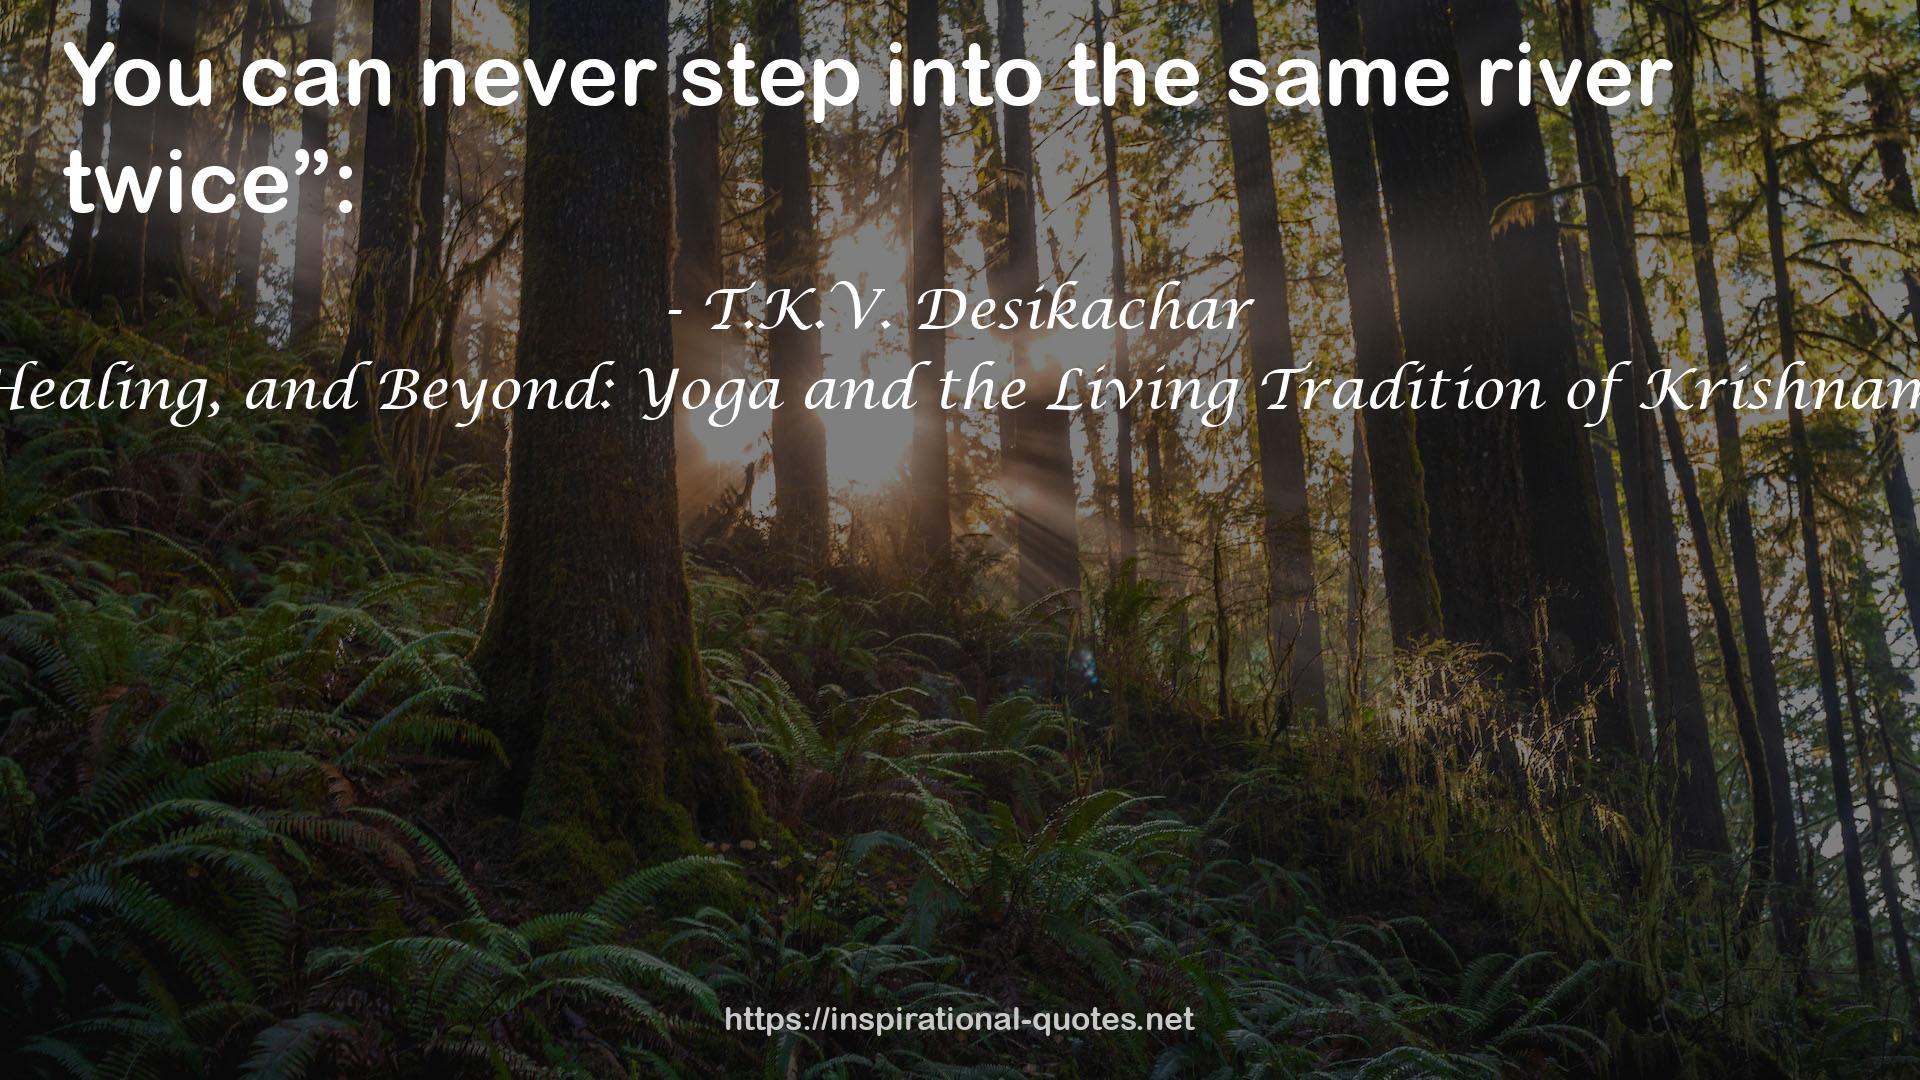 Health, Healing, and Beyond: Yoga and the Living Tradition of Krishnamacharya QUOTES